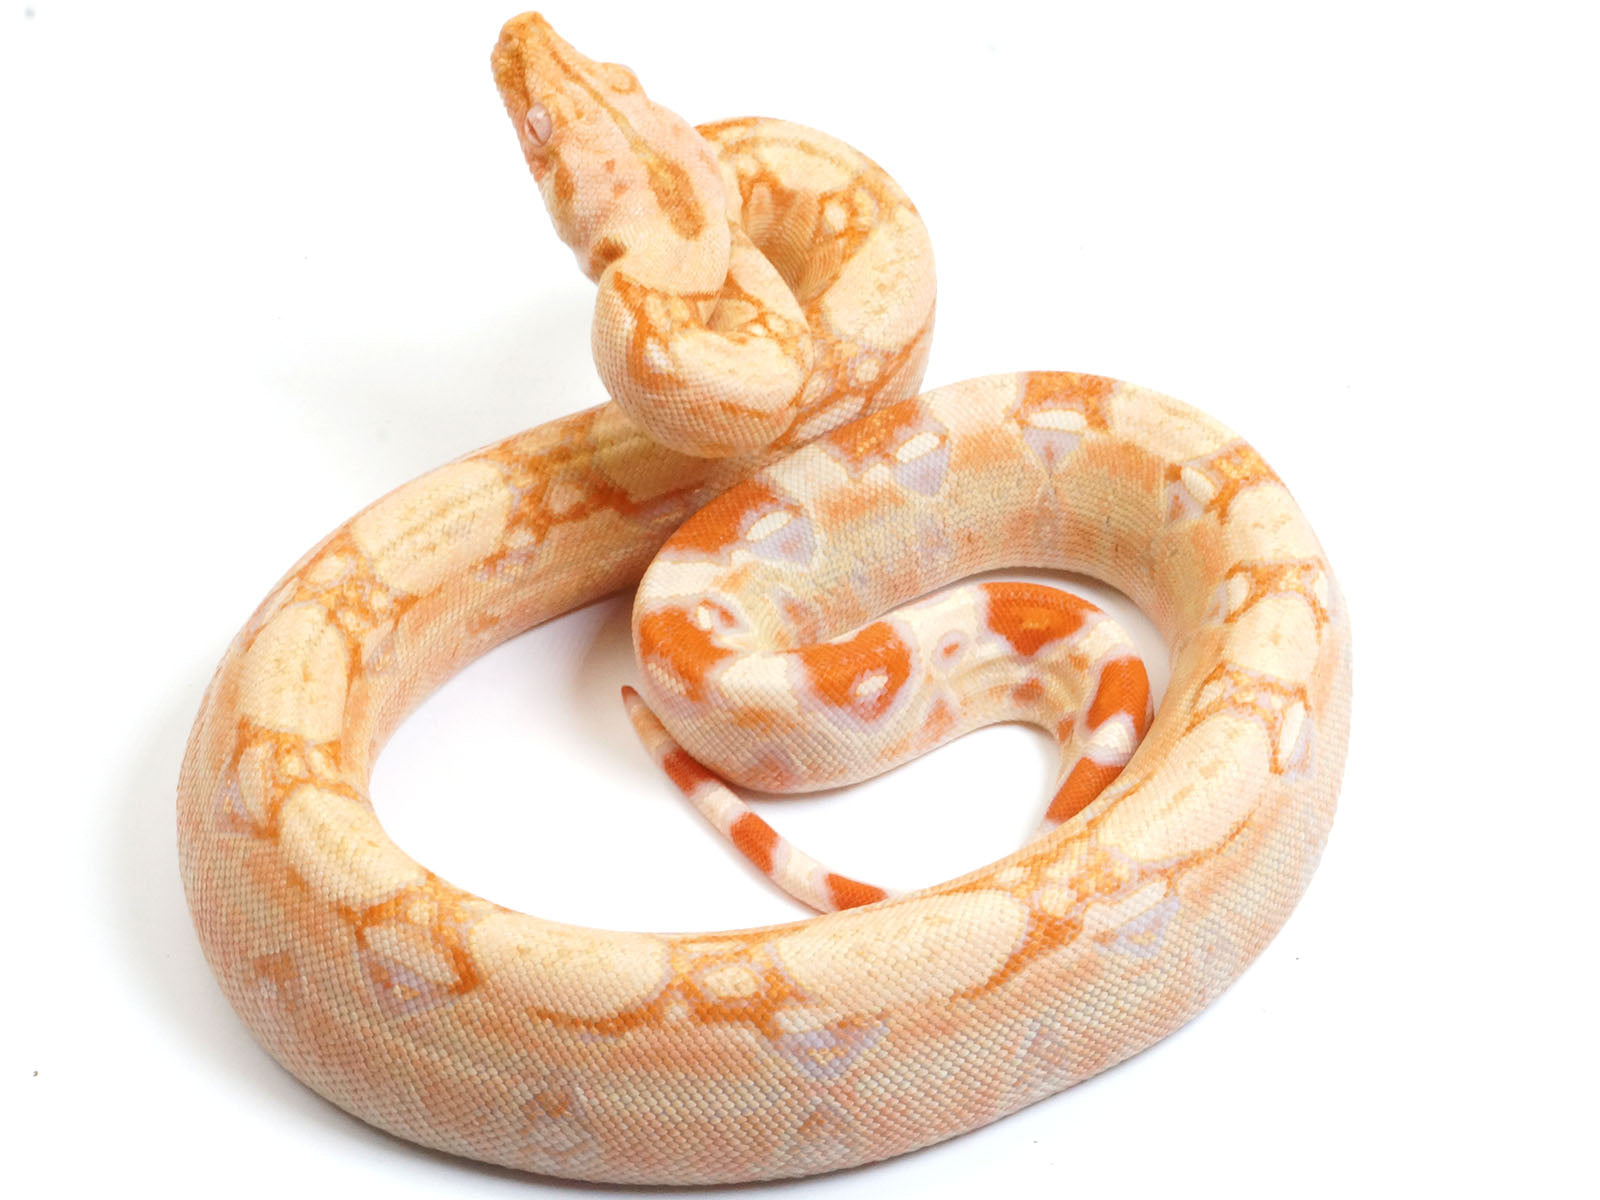 803 Albino Boa Constrictor Images, Stock Photos, 3D objects, & Vectors